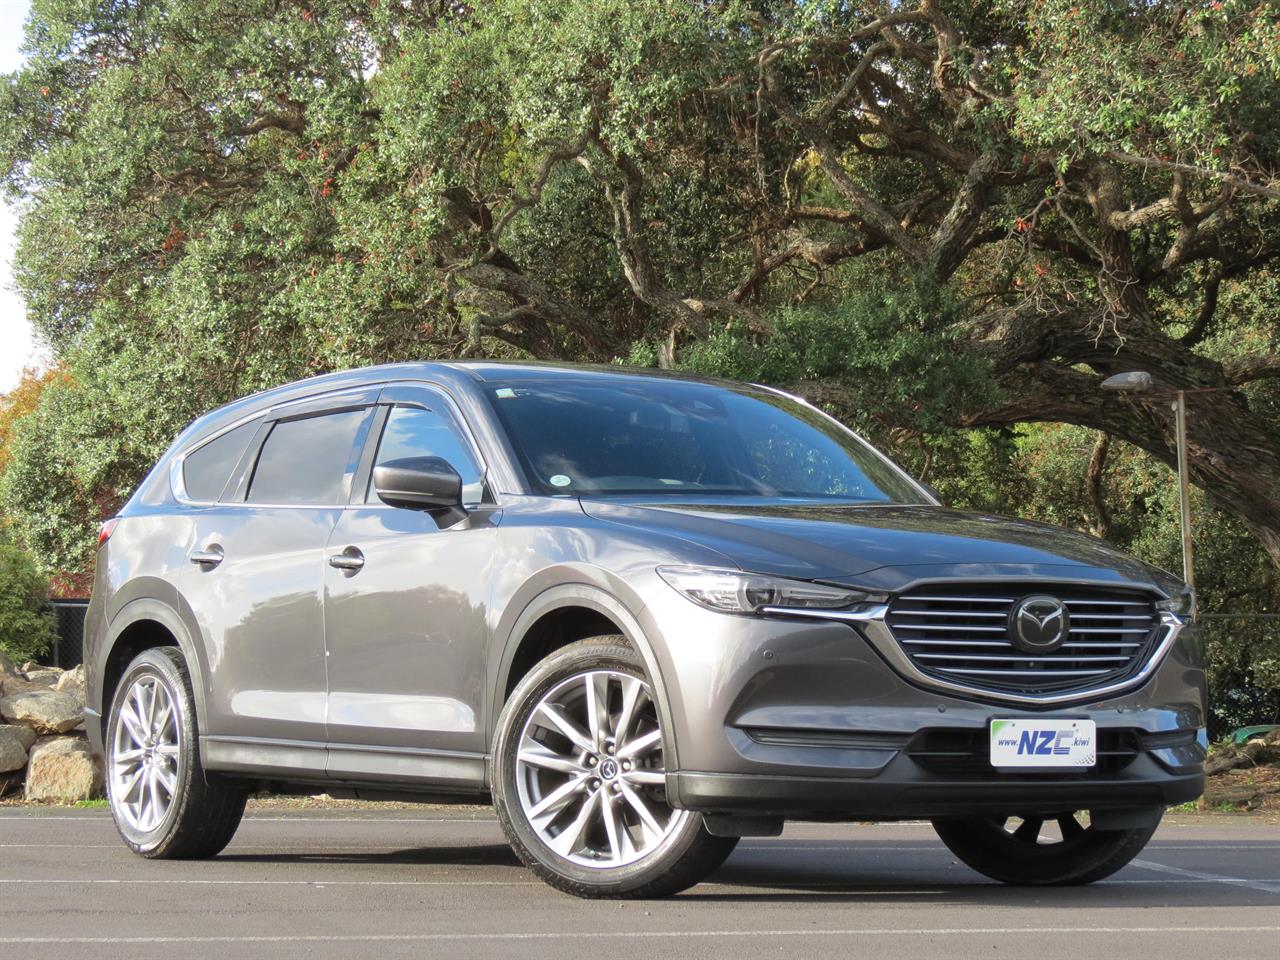 NZC best hot price for 2018 Mazda CX-8 in Auckland